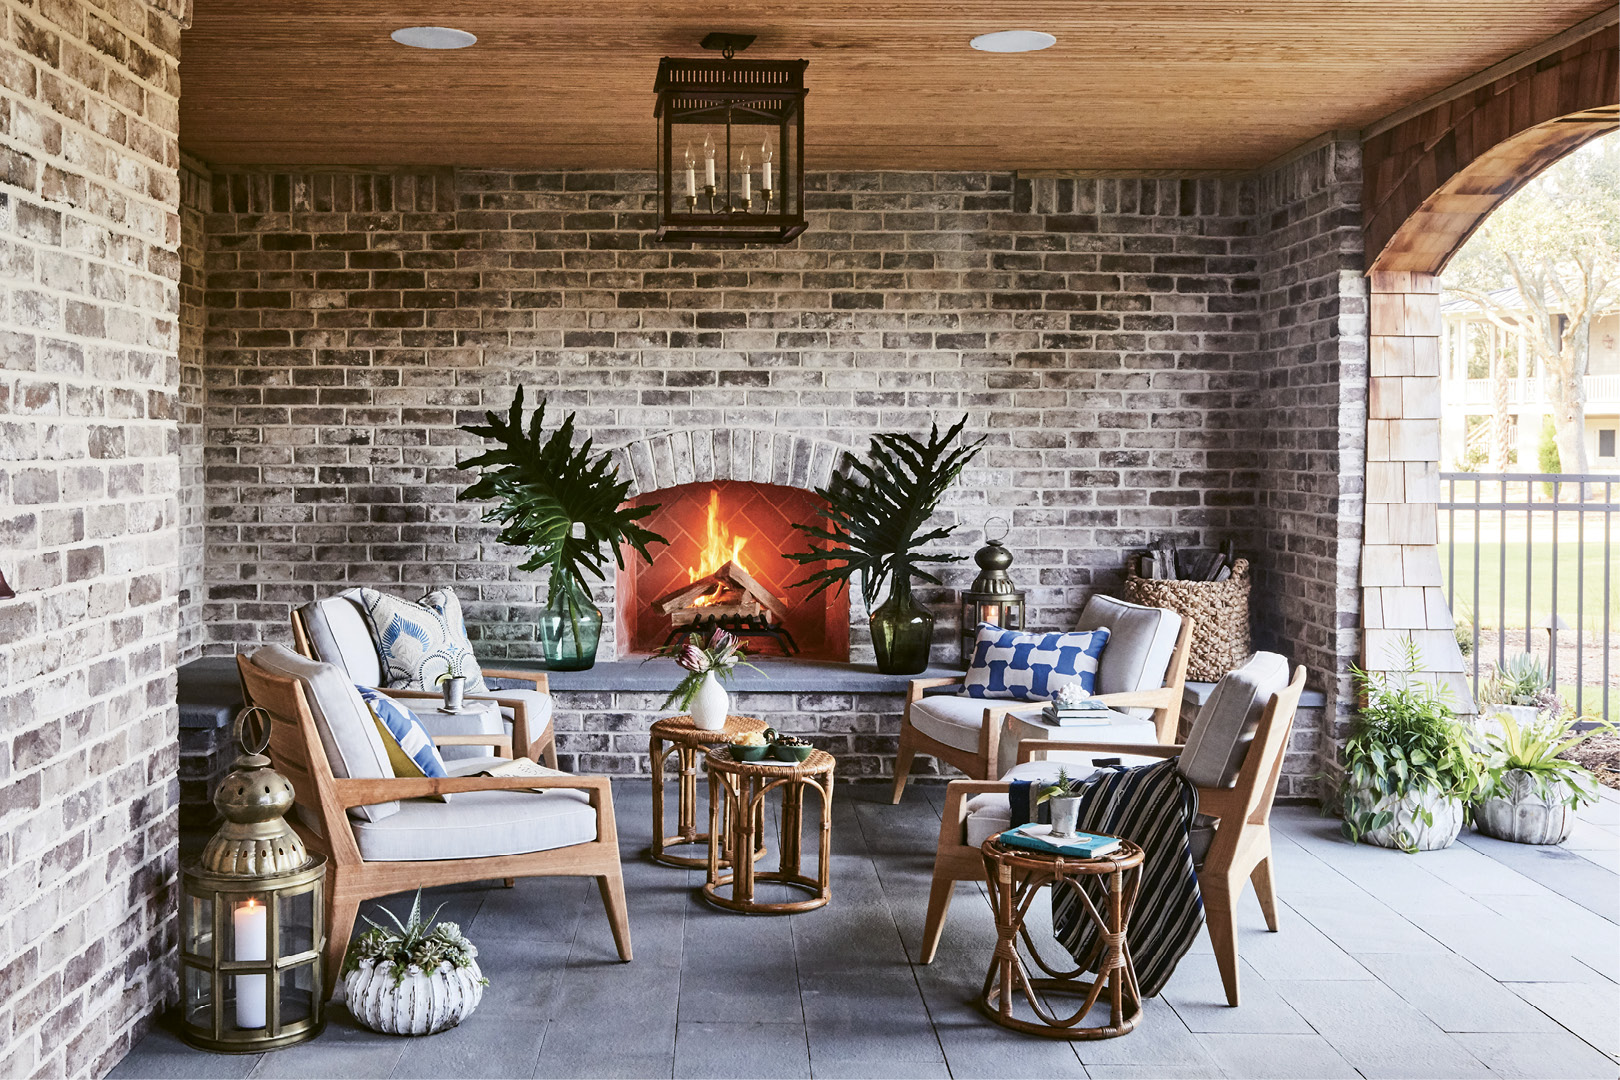 An outdoor living room, complete with fireplace (left), is a cozy entertaining spot, especially on cool winter nights.